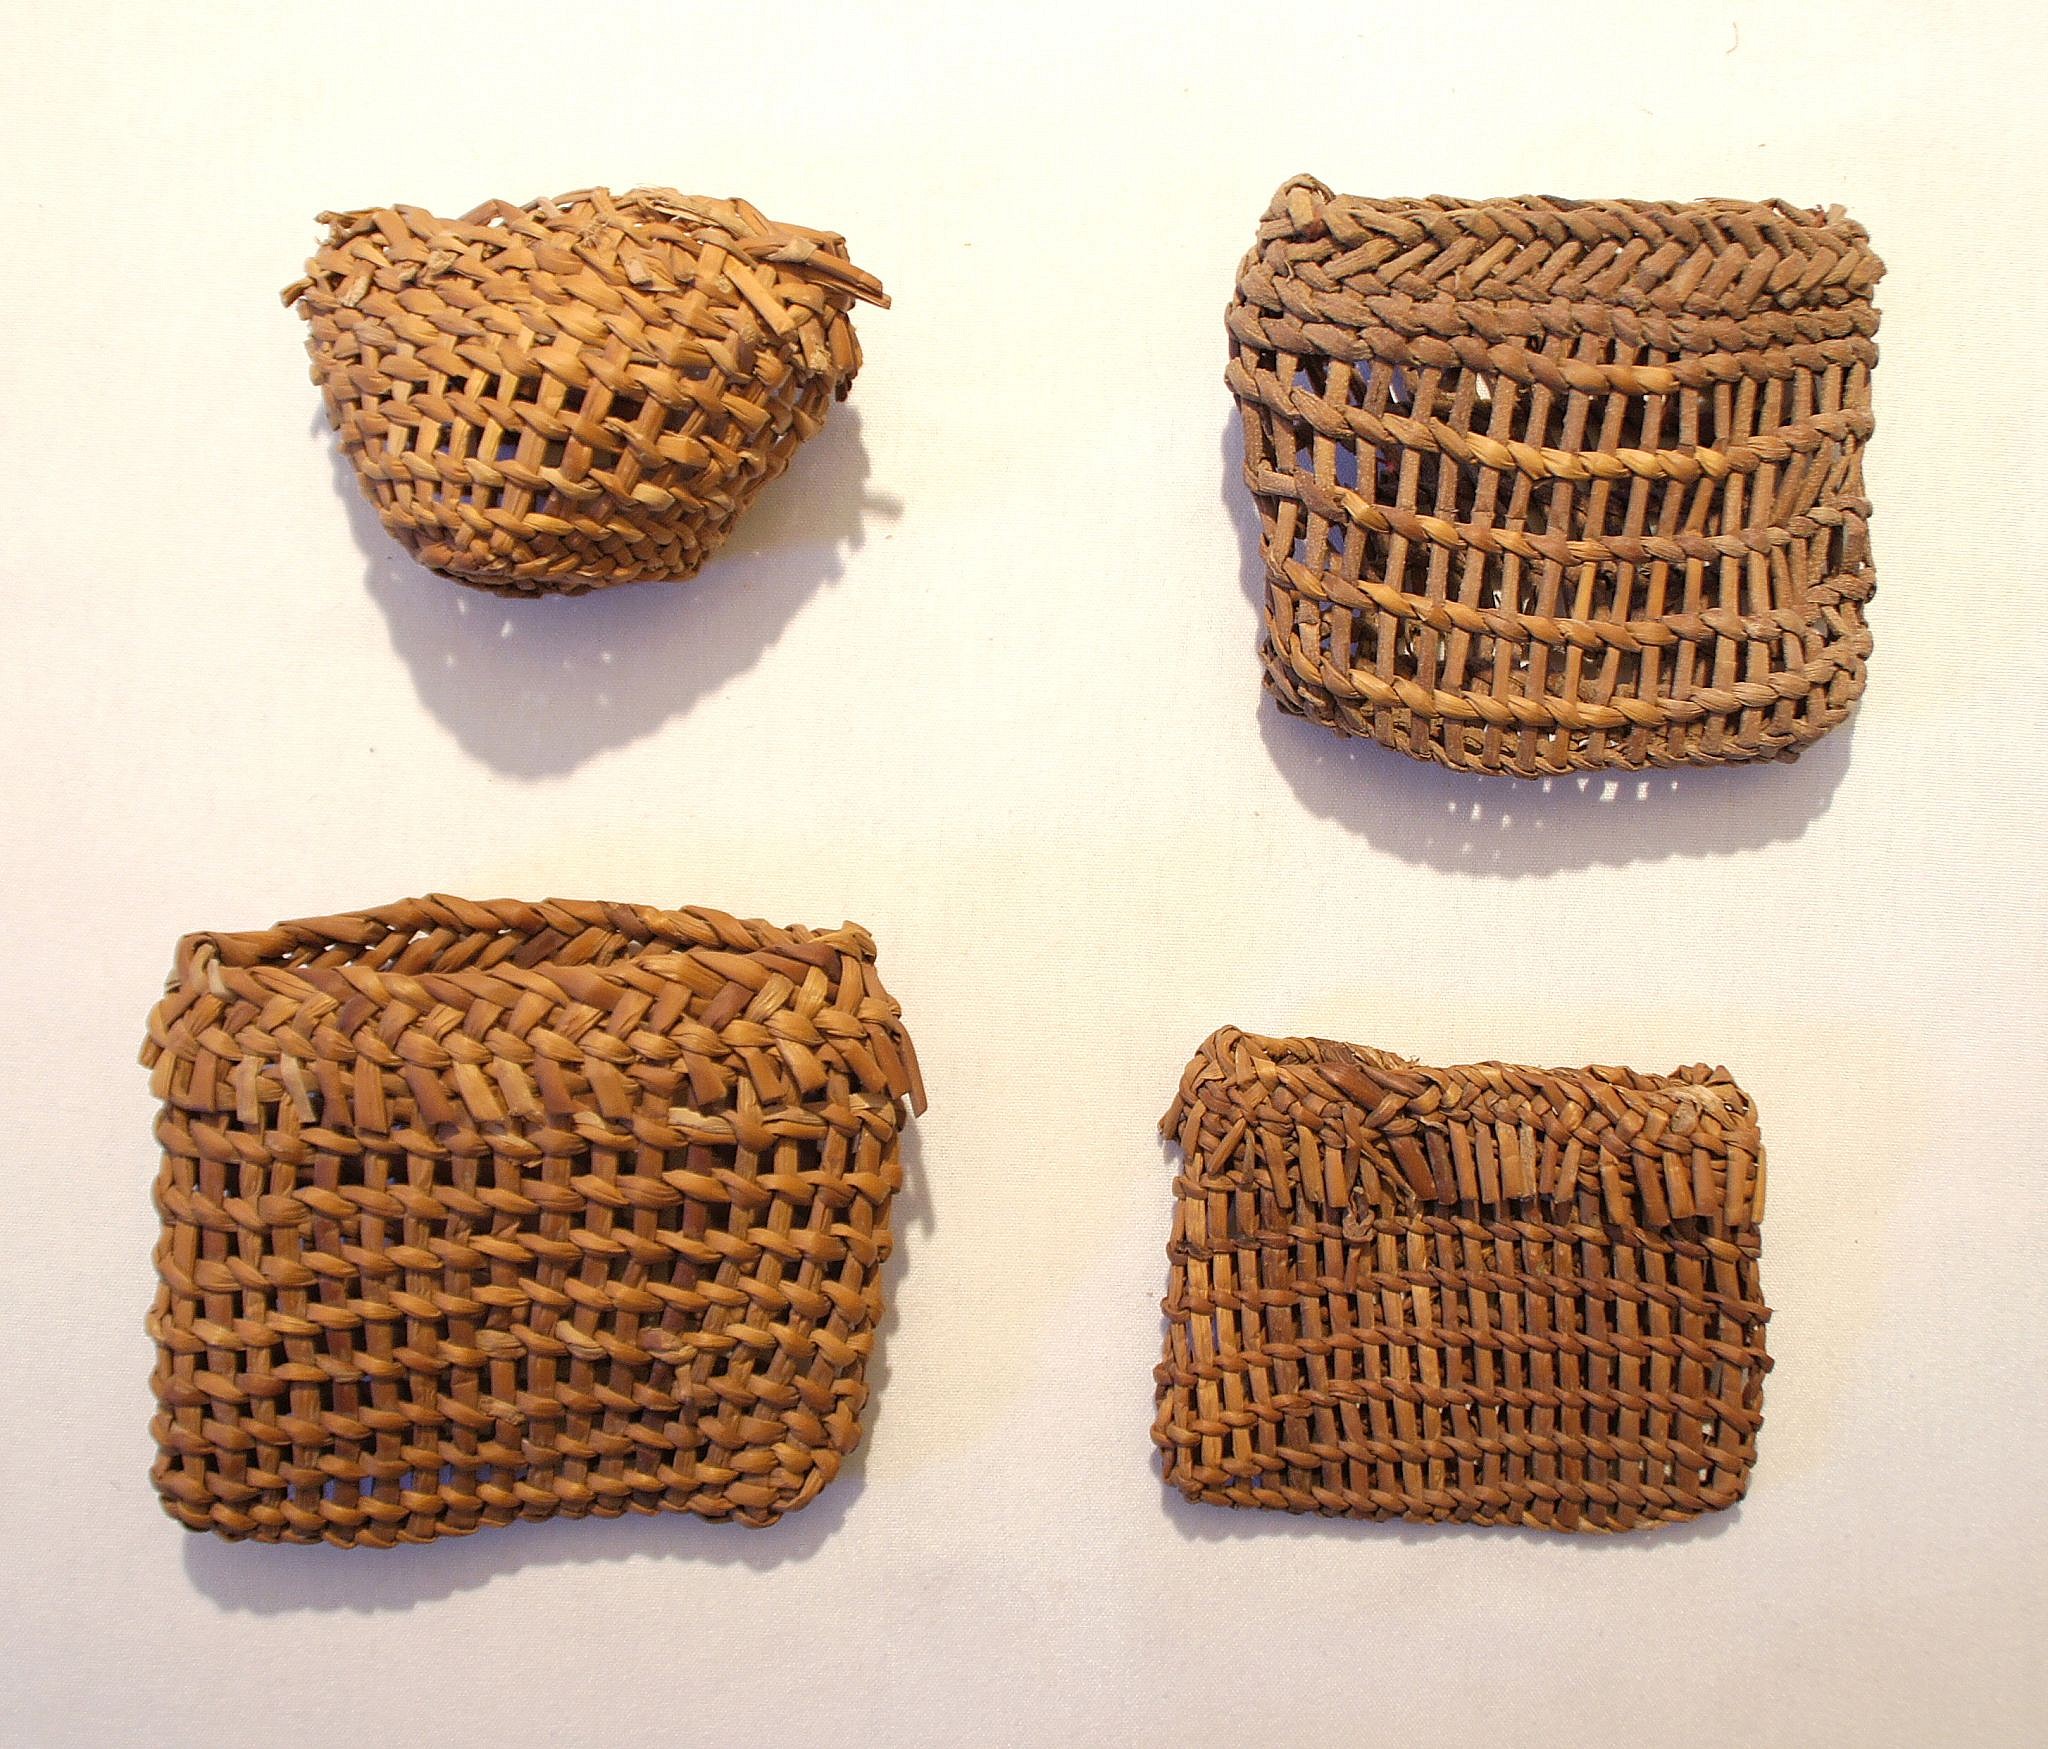 Chile, Eight Twined Baskets For Fishing Line and Hooks
These small baskets made of tule reed were decorated with different patterns.  The baskets were just big enough to hold a hook, line and sinker.  It is possible that all four baskets were made by the same maker.
Media: Wood
Dimensions: Height: 1.25" - 1.75"
N6025